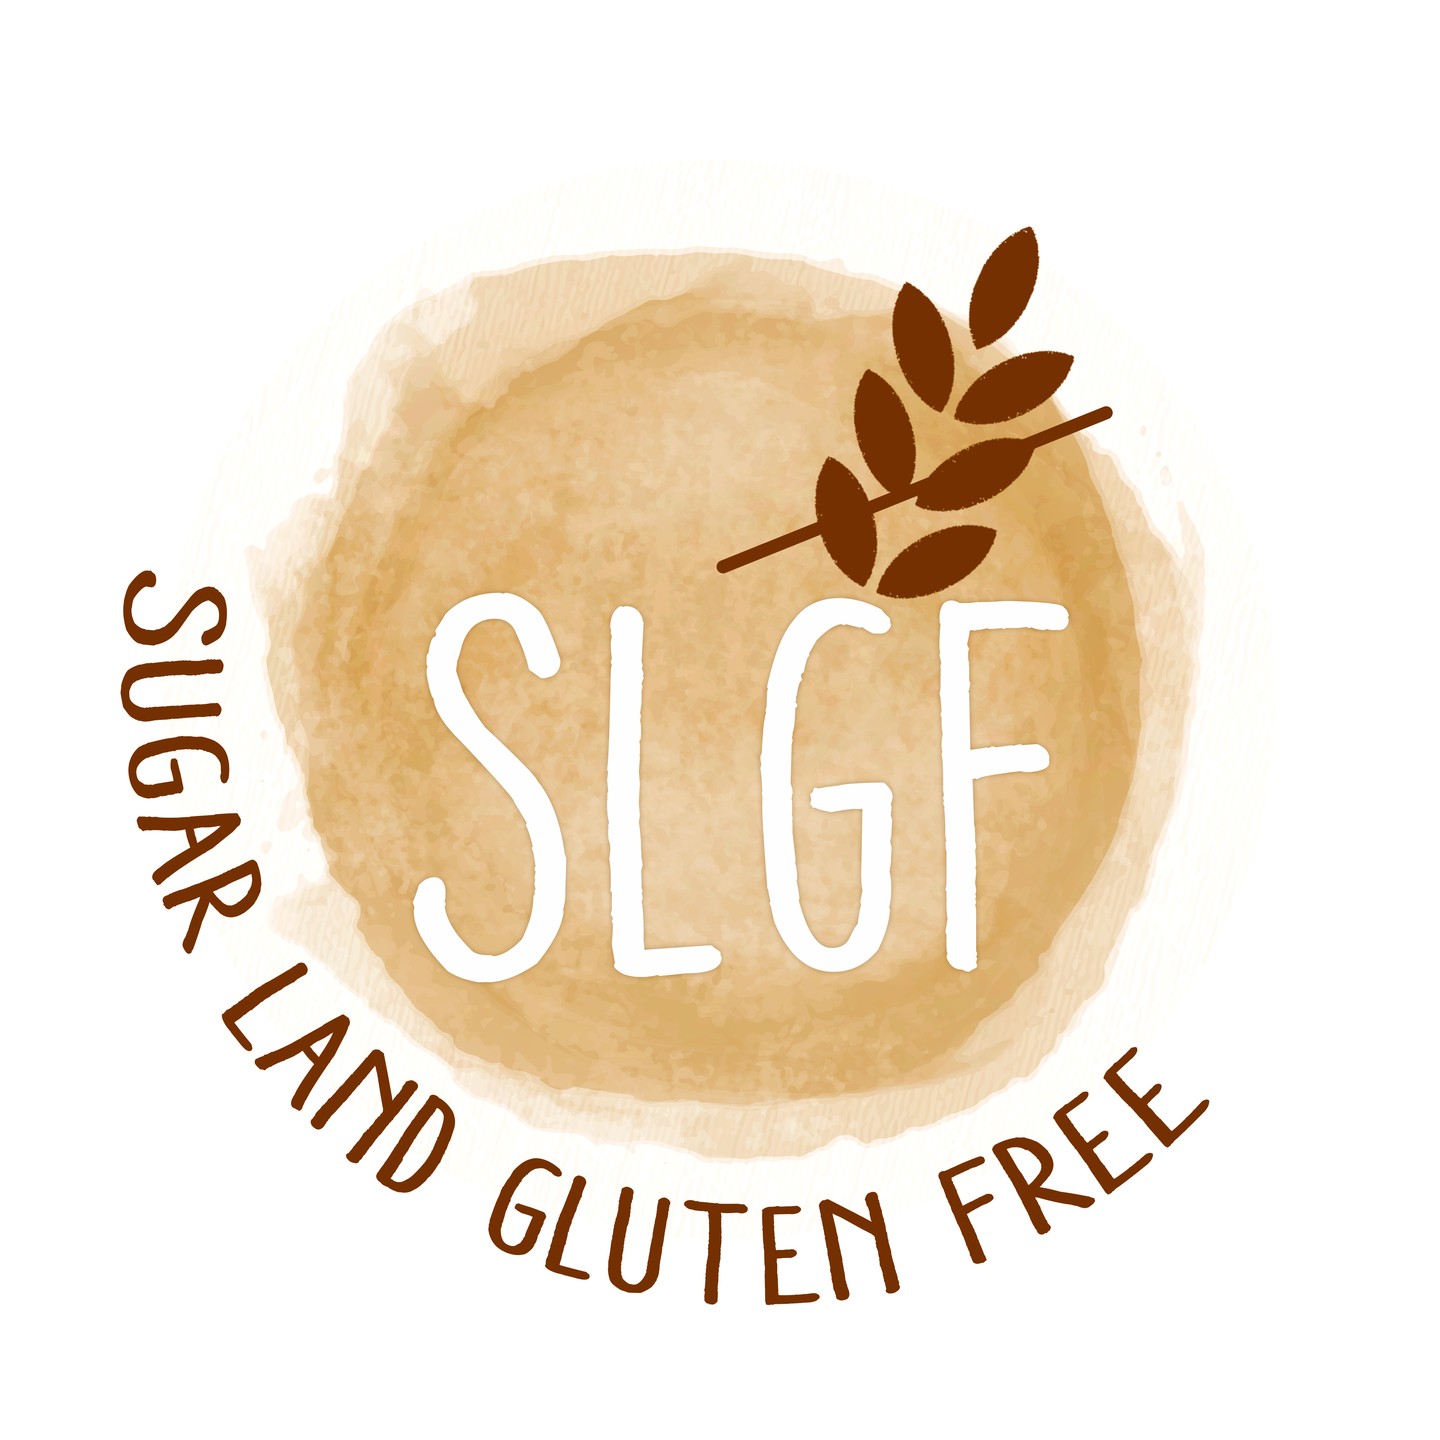 Hi I'm so exited!!!
I just moved to Melissa and will be reopening soon :)
So if you are celiac, have food allergies, intolerances or sensitivities, I can bake some delicious treats for you.
My kitchen is 100% gluten and dairy free (no risk of cross contamination).
I'm working on a free sample box, so if you're interested or know who might be interested, follow me on instagram or facebook where I'll post the date and address to pick up your sample box.